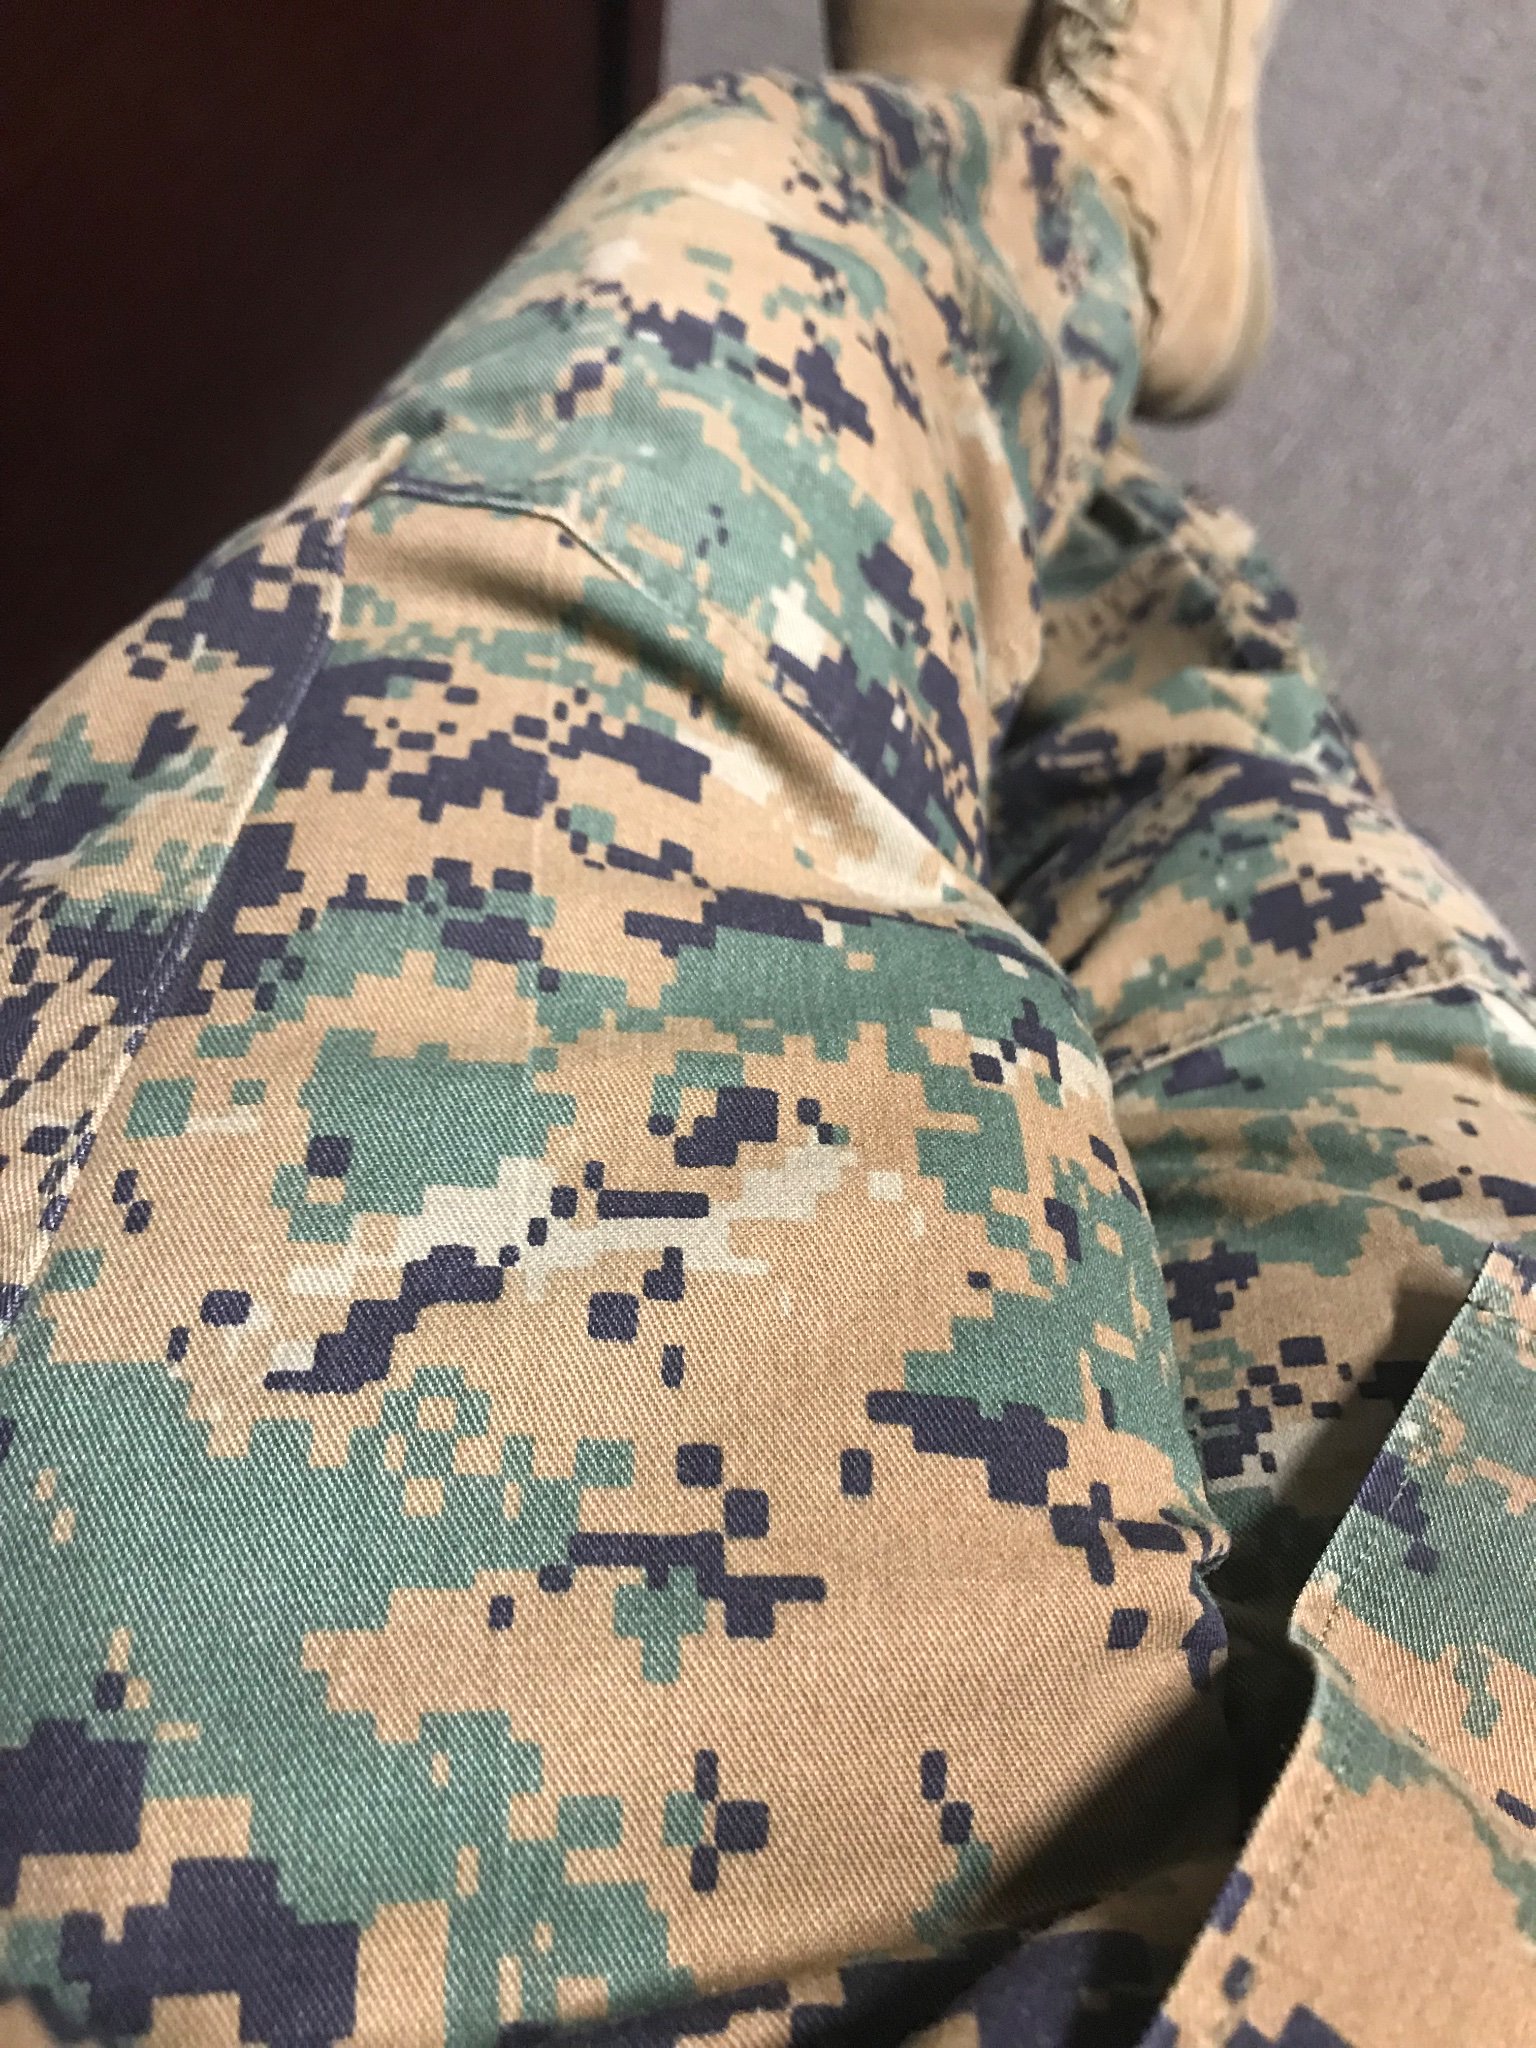 Military only fans